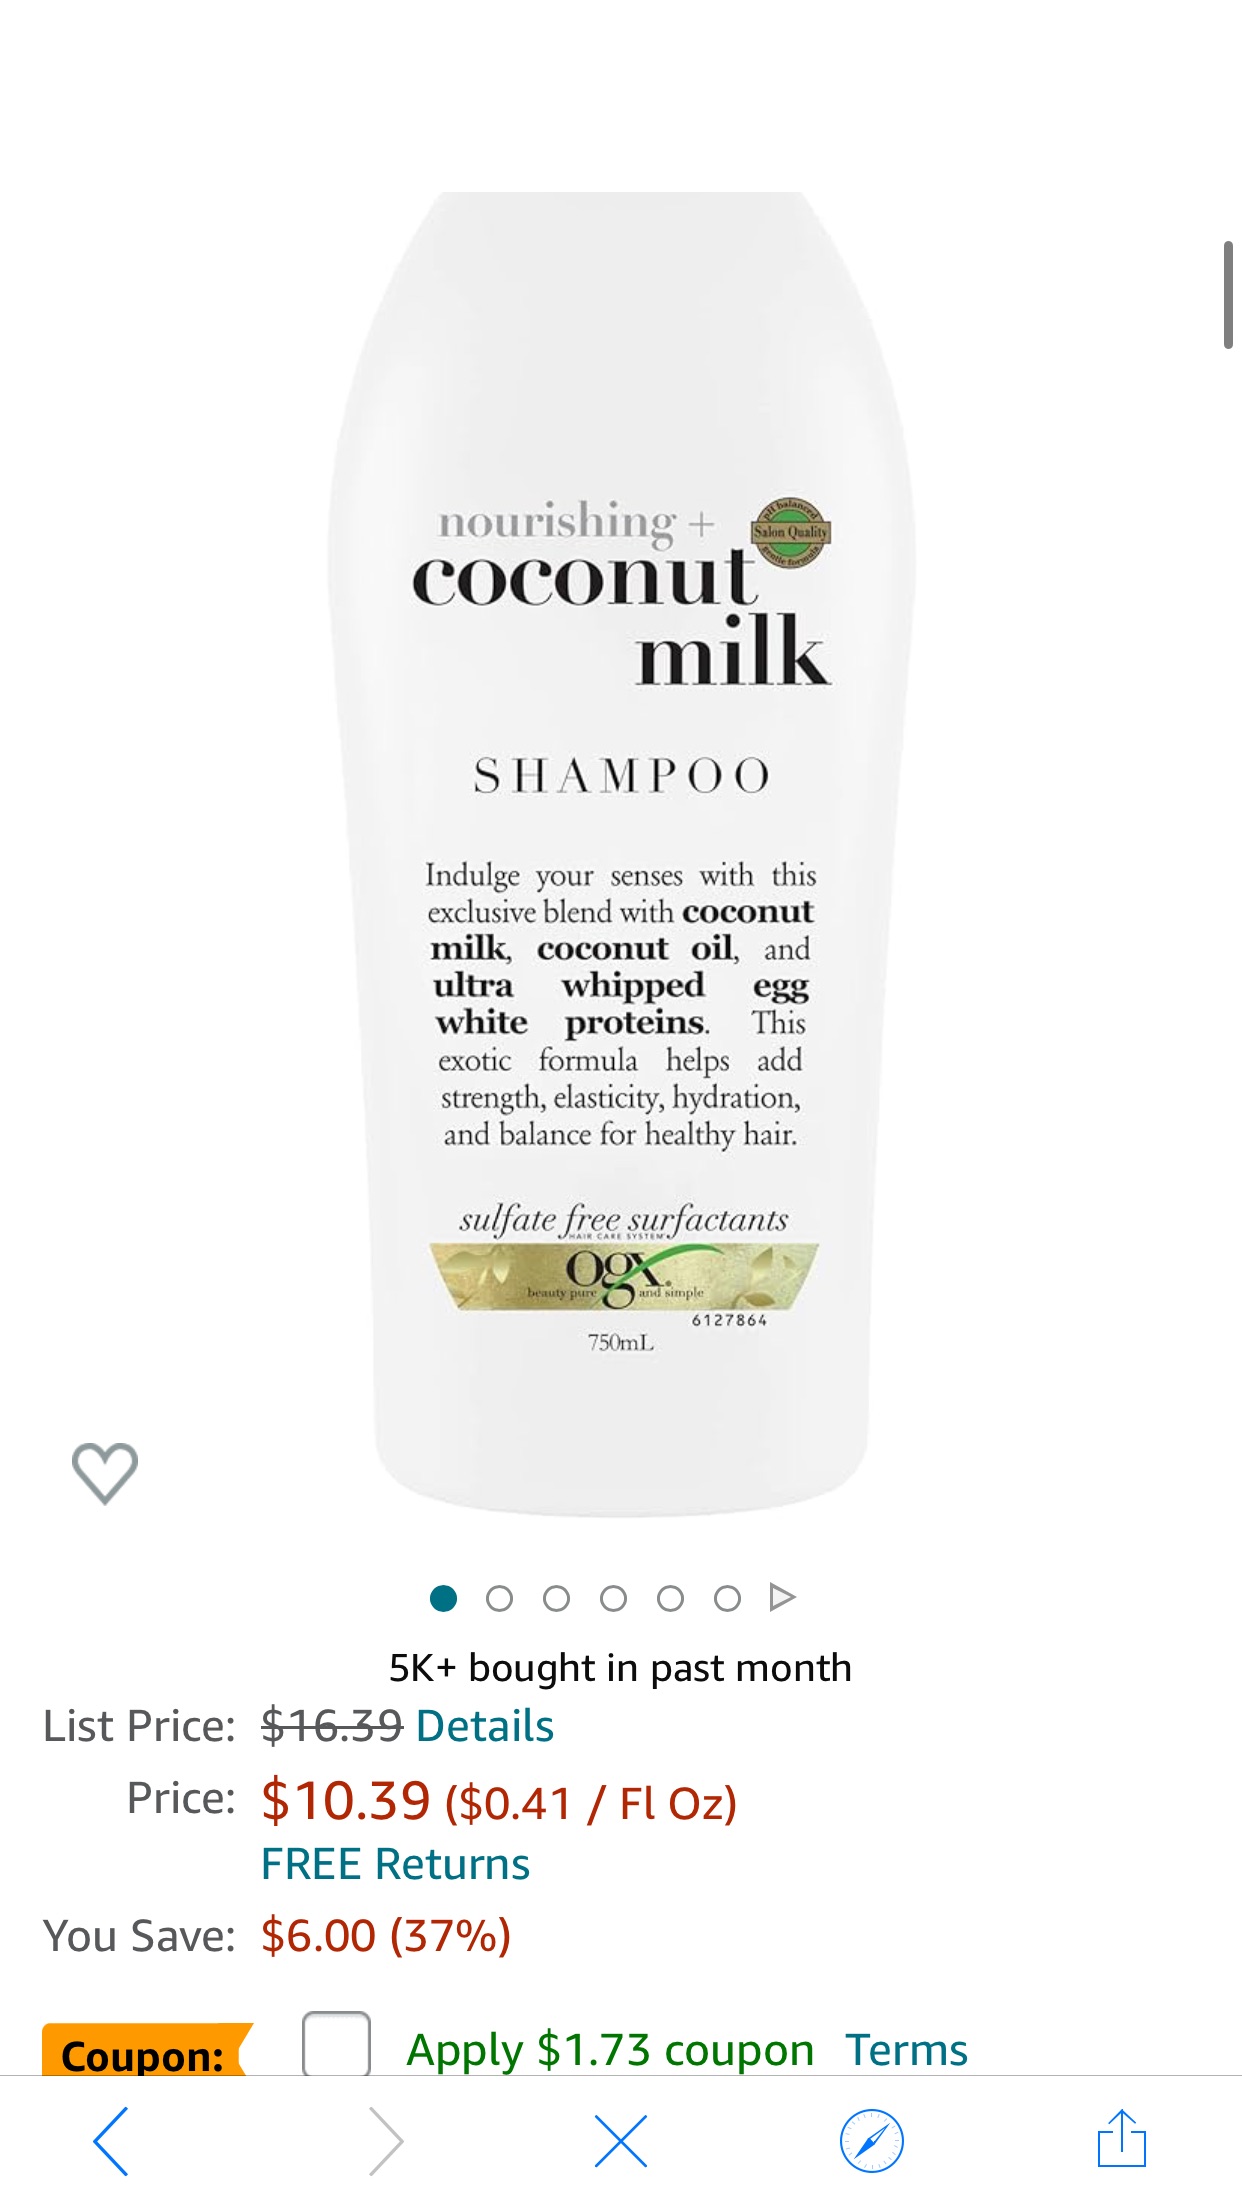 Amazon.com : OGX Nourishing Coconut Milk Shampoo for Strong, Healthy Hair - With Coconut Oil, Egg White Protein, Sulfate & Paraben-Free - 25.4 fl oz : Hair Shampoos : Beauty & Personal Care